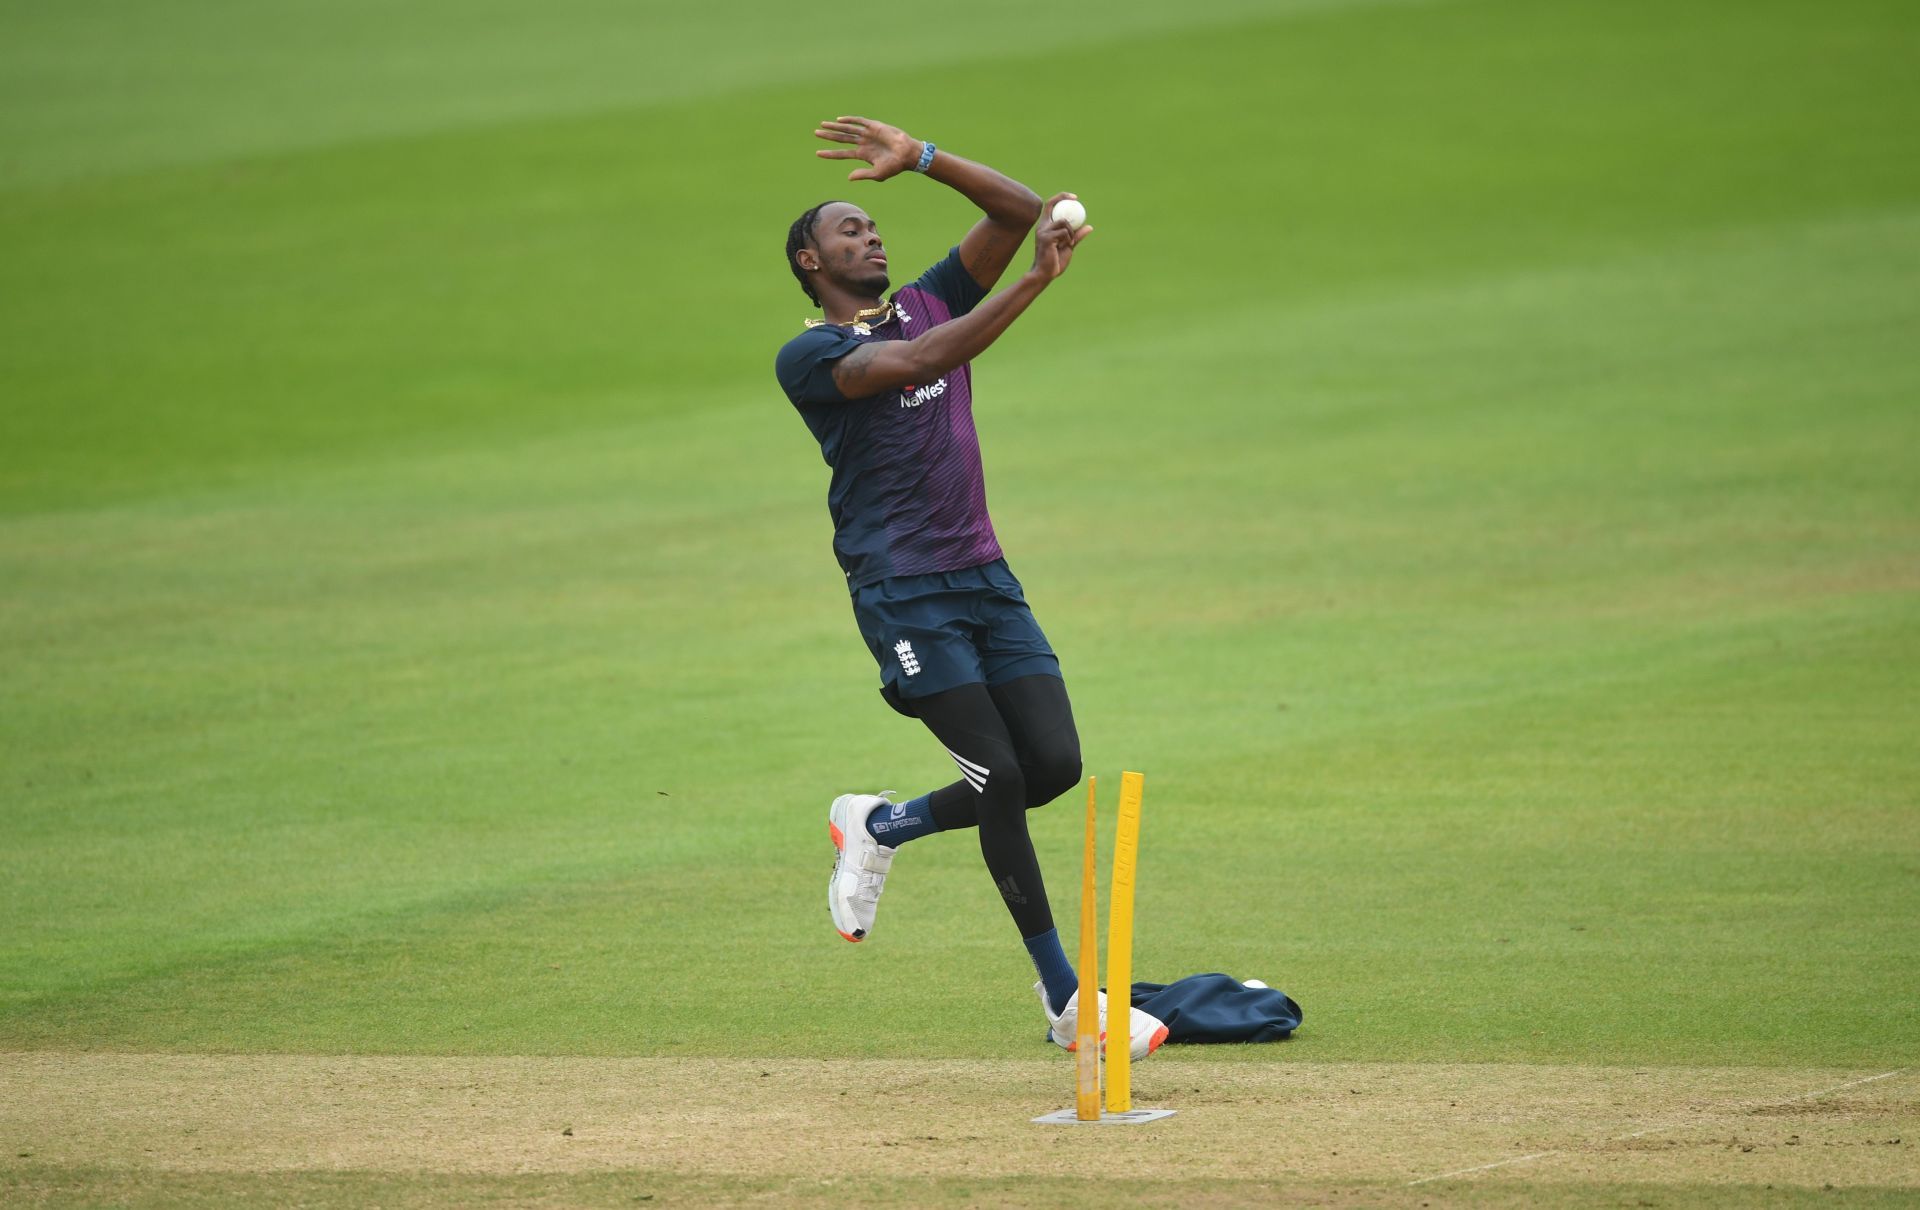 Jofra Archer will miss the upcoming T20 World Cup as a result of an injury